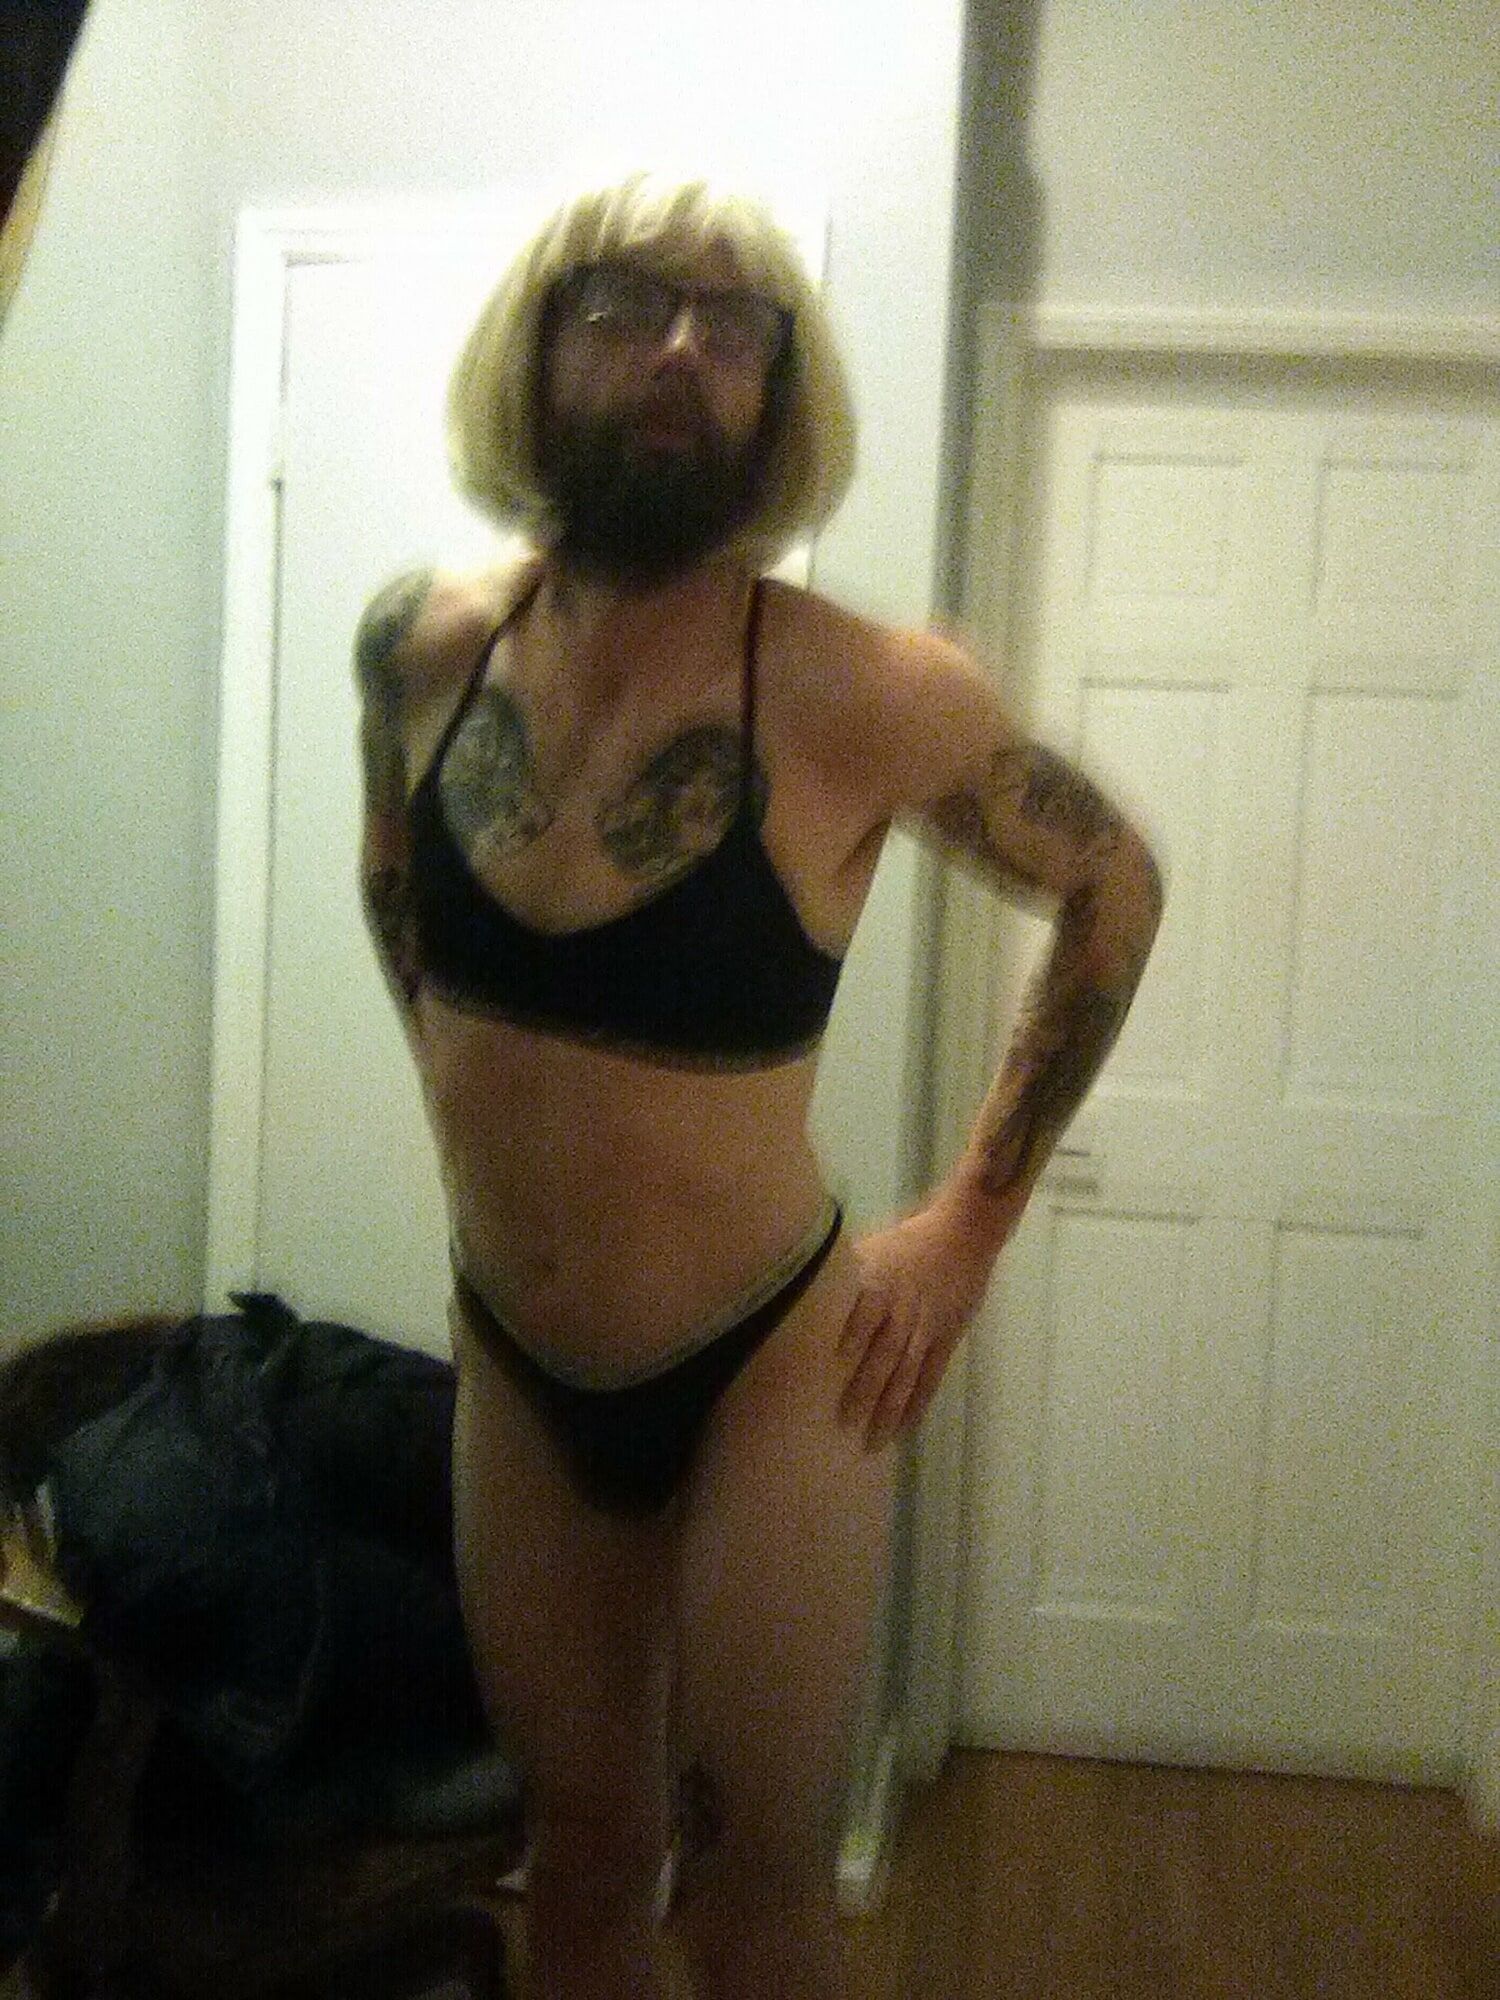 CD in ex gf apt with stranger trying on her clothes  #9